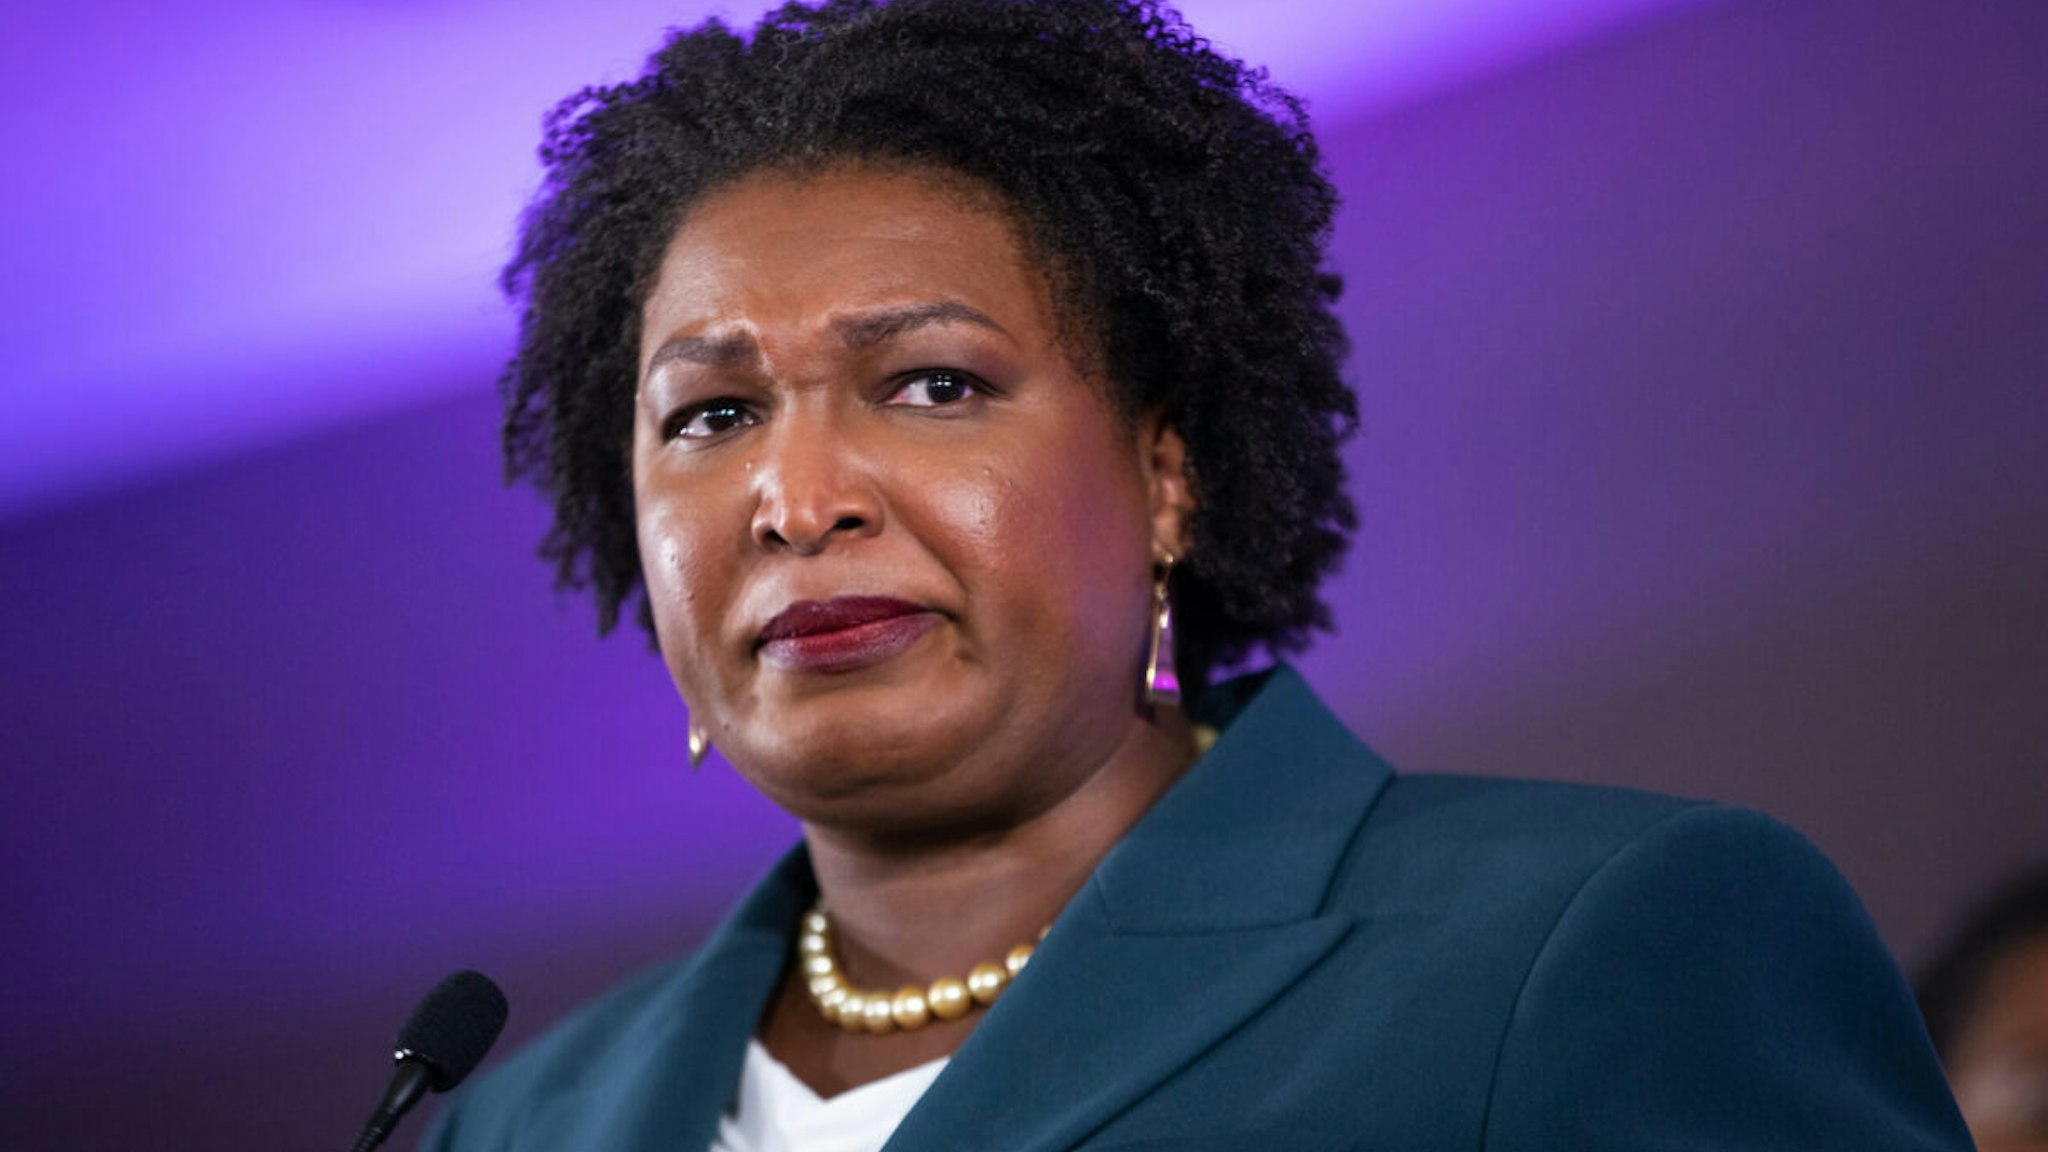 Stacey Abrams, Democratic gubernatorial candidate for Georgia, during an election night rally in Atlanta, Georgia, US, on Tuesday, Nov. 8, 2022.